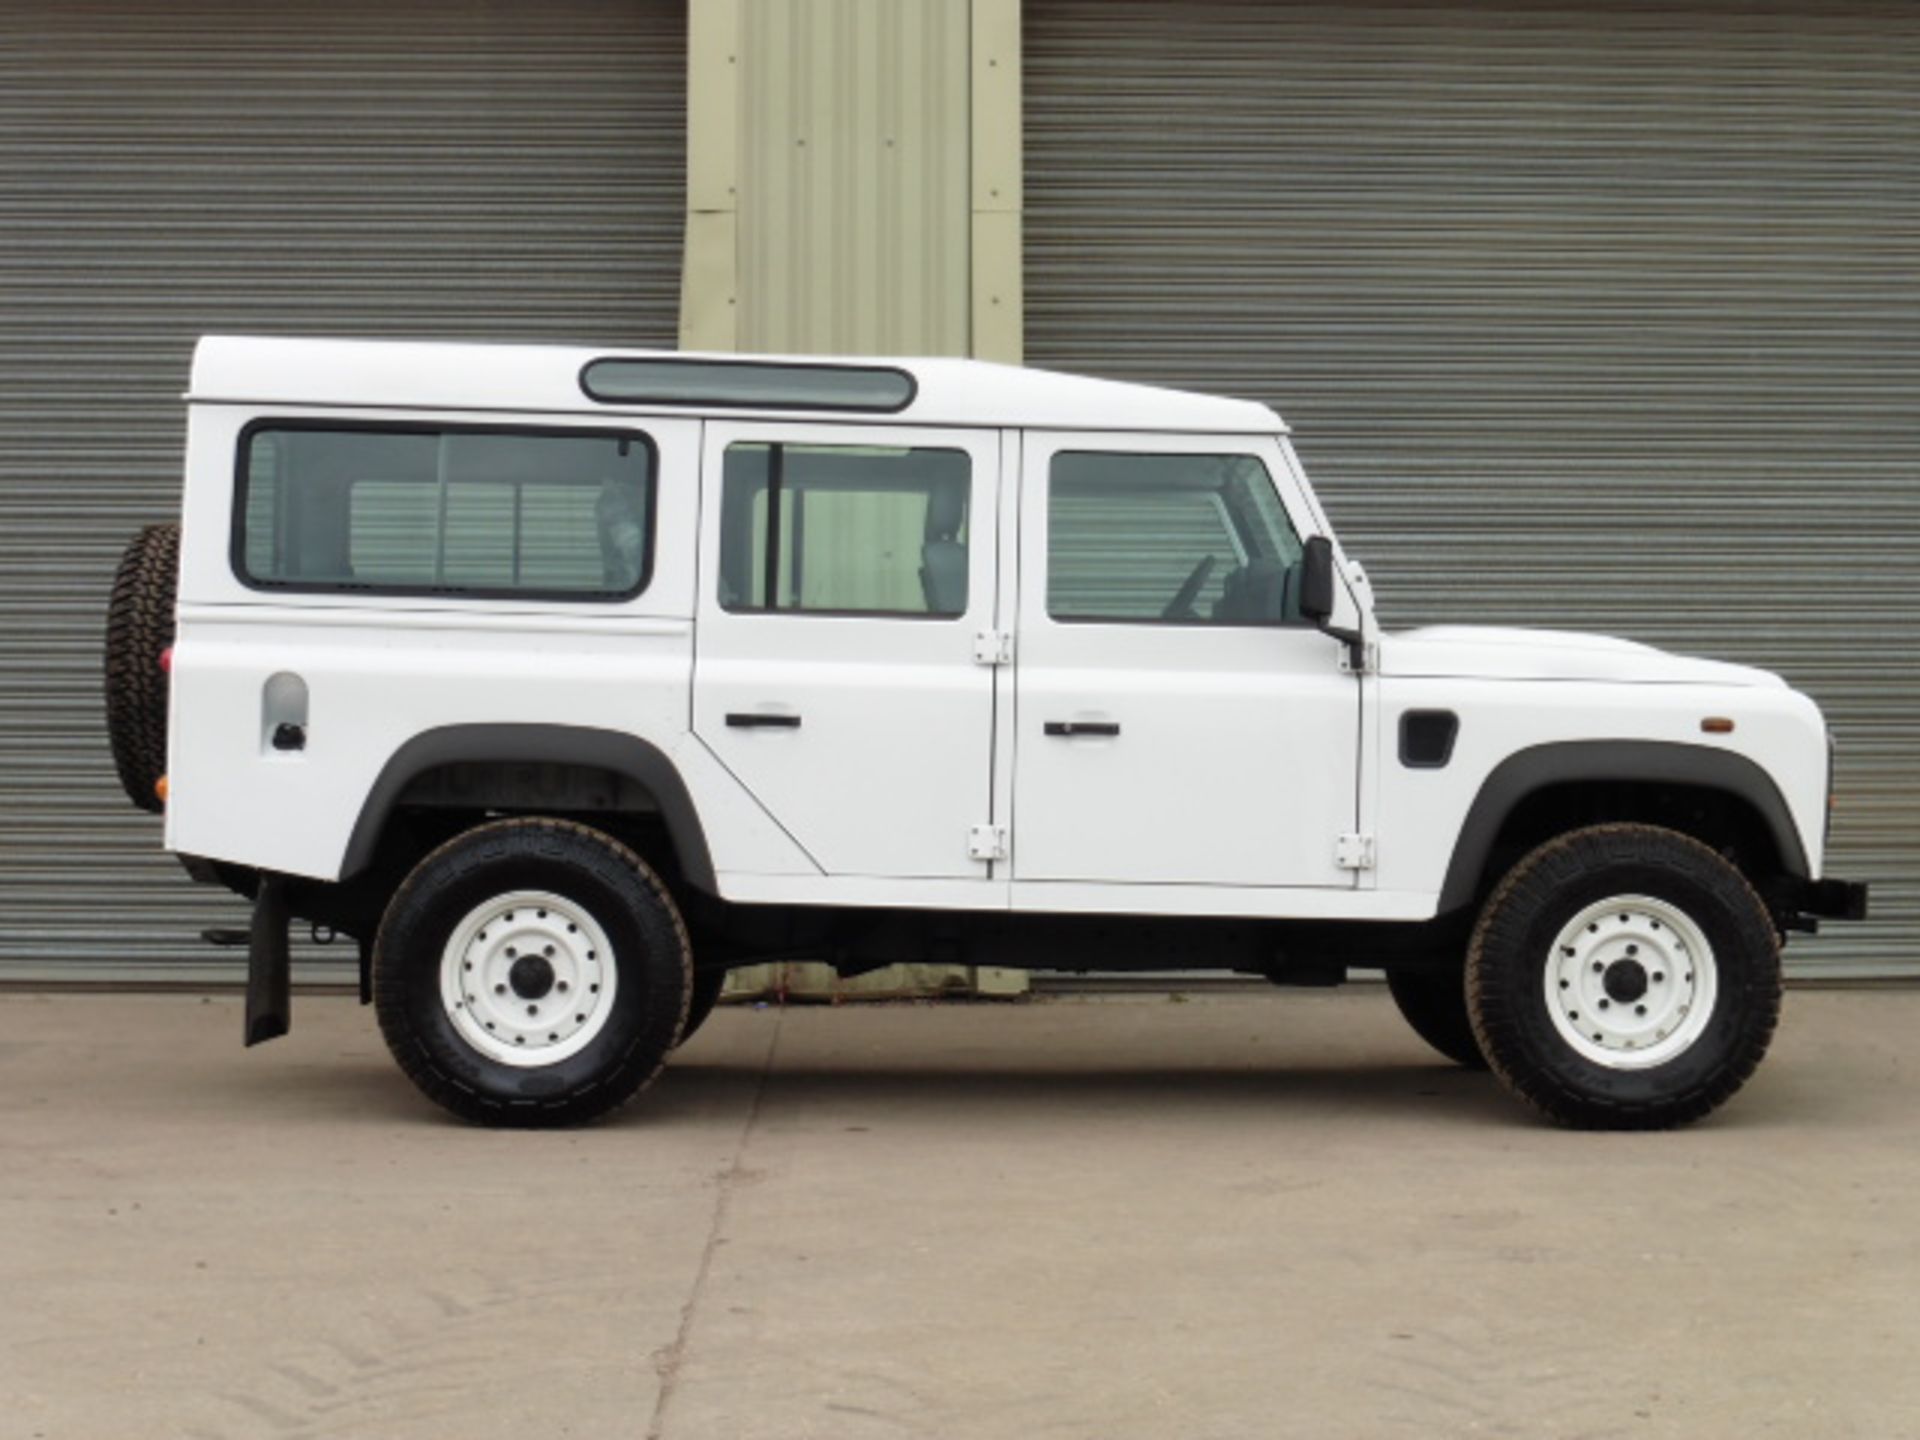 Delivery Mileage 2013 model year Land Rover Defender 110 5 door station wagon LHD - Image 5 of 20